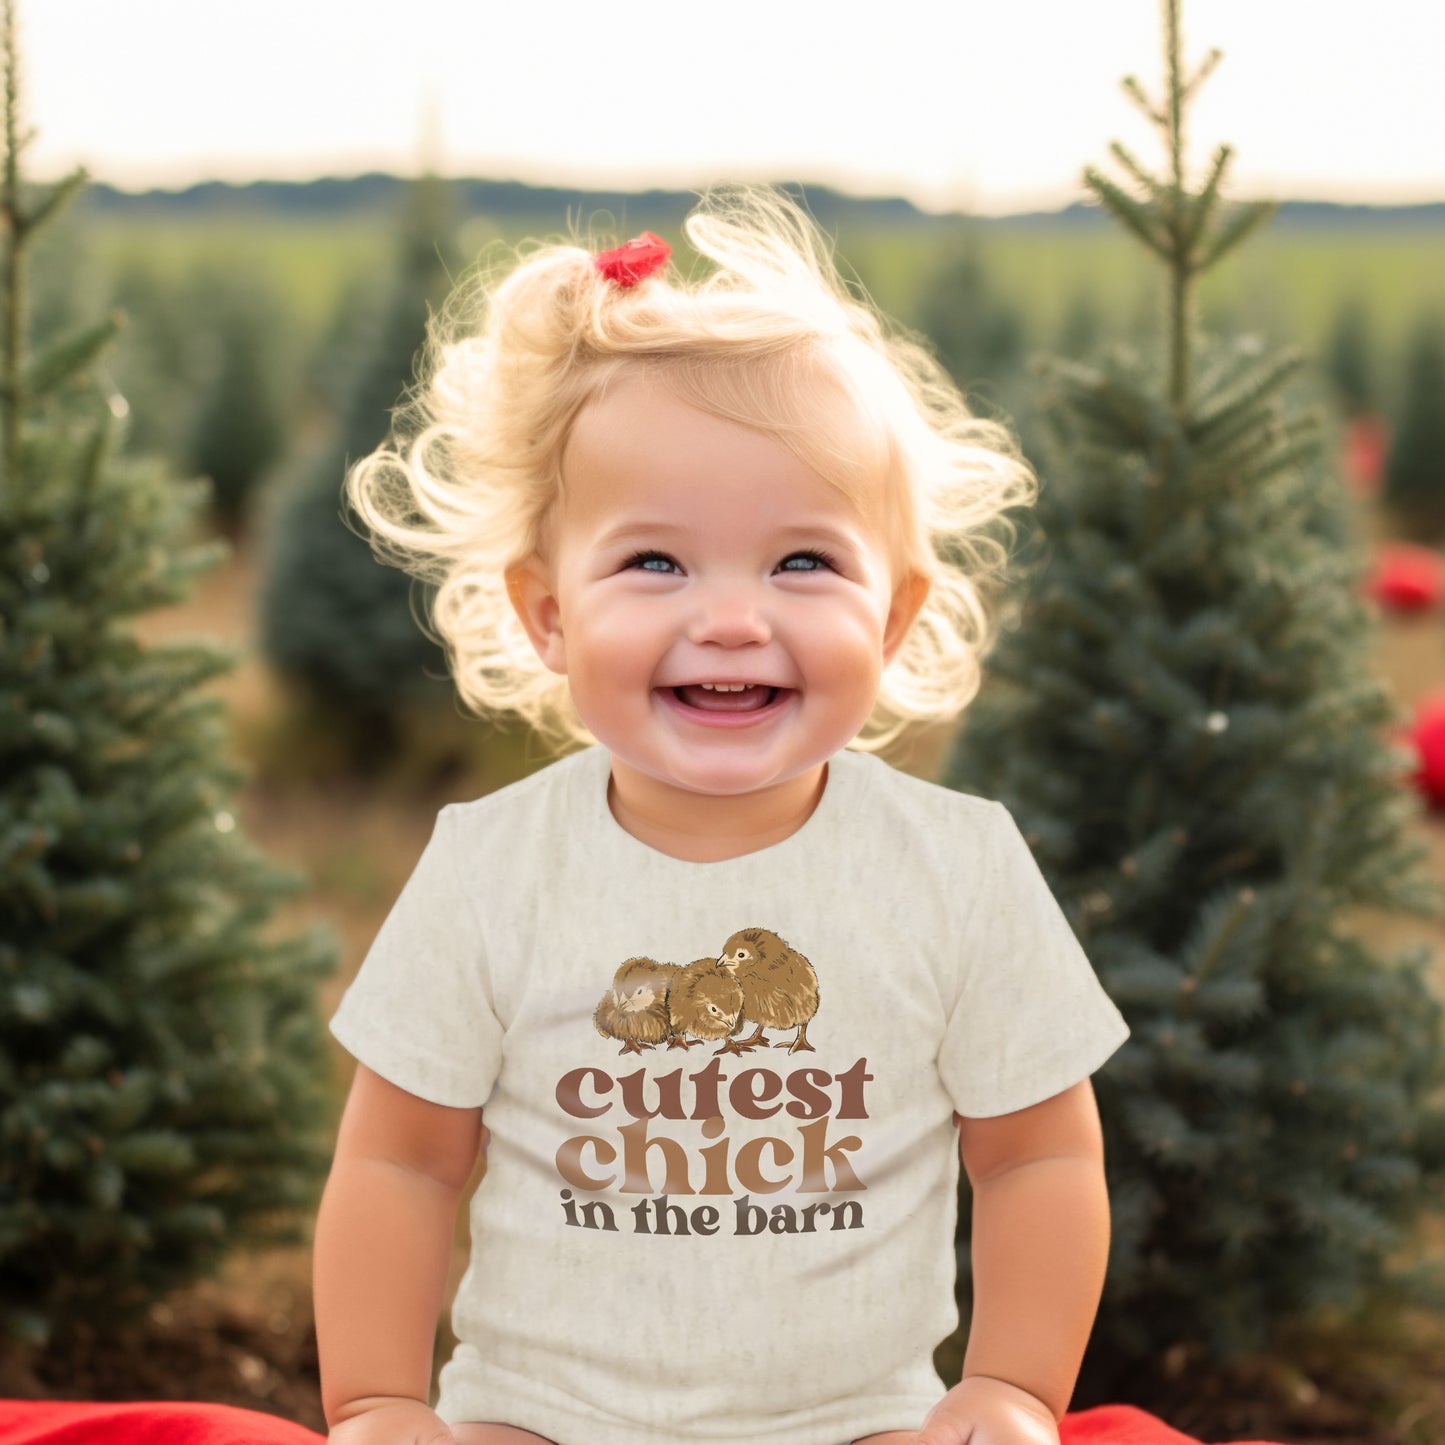 "Cutest Chick in the barn" Baby Girl Beige Chicken Body Suit